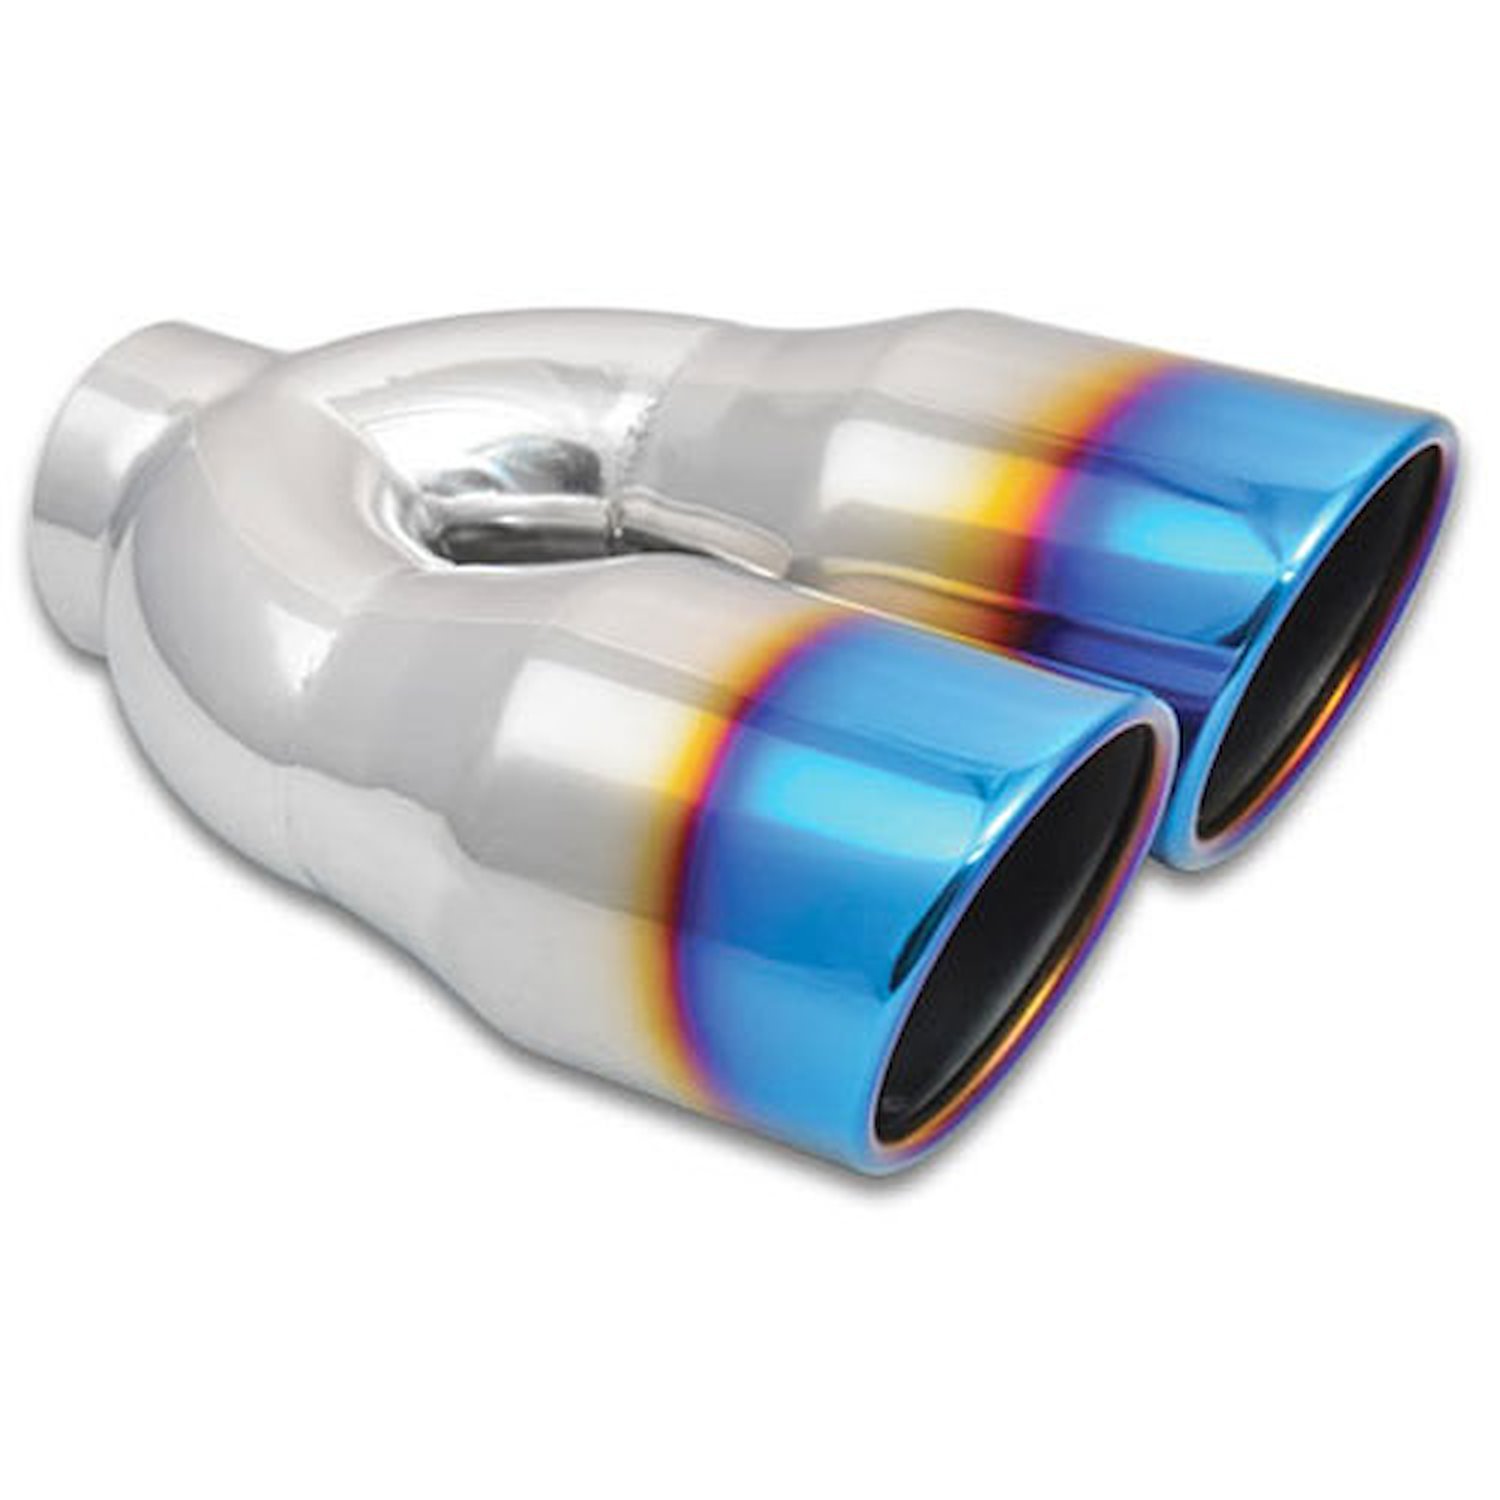 Dual Round Stainless Steel Exhaust Tip